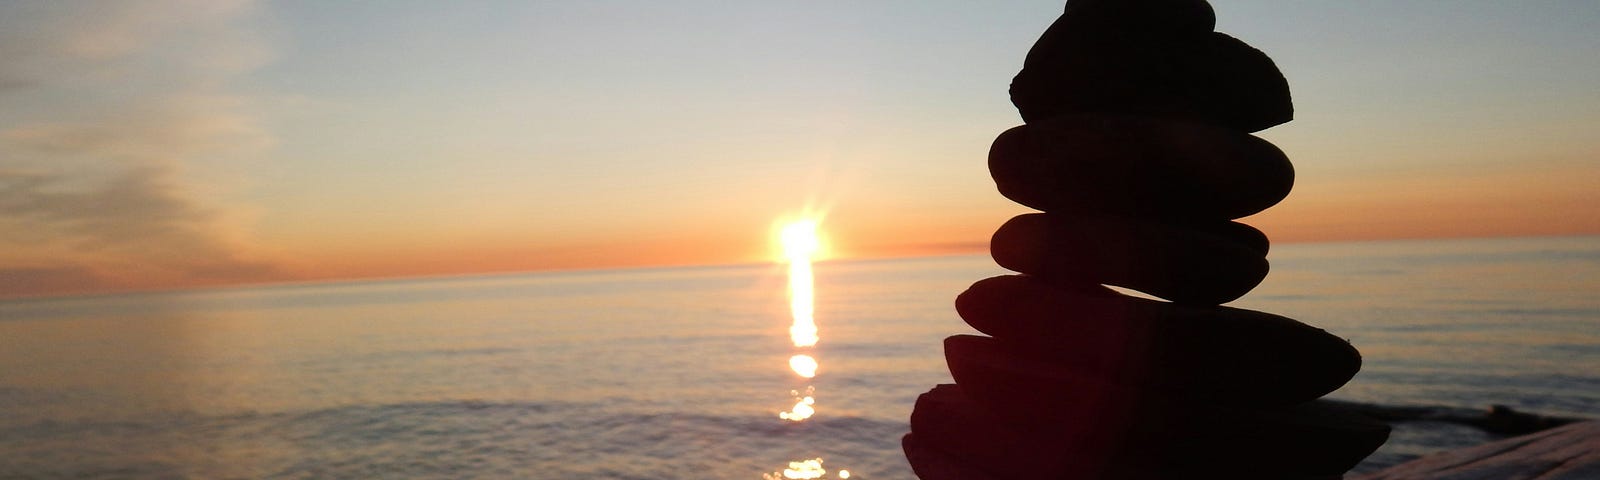 Flat stones in a cairn-like shape, silhouetted as the setting sun sets over the water.